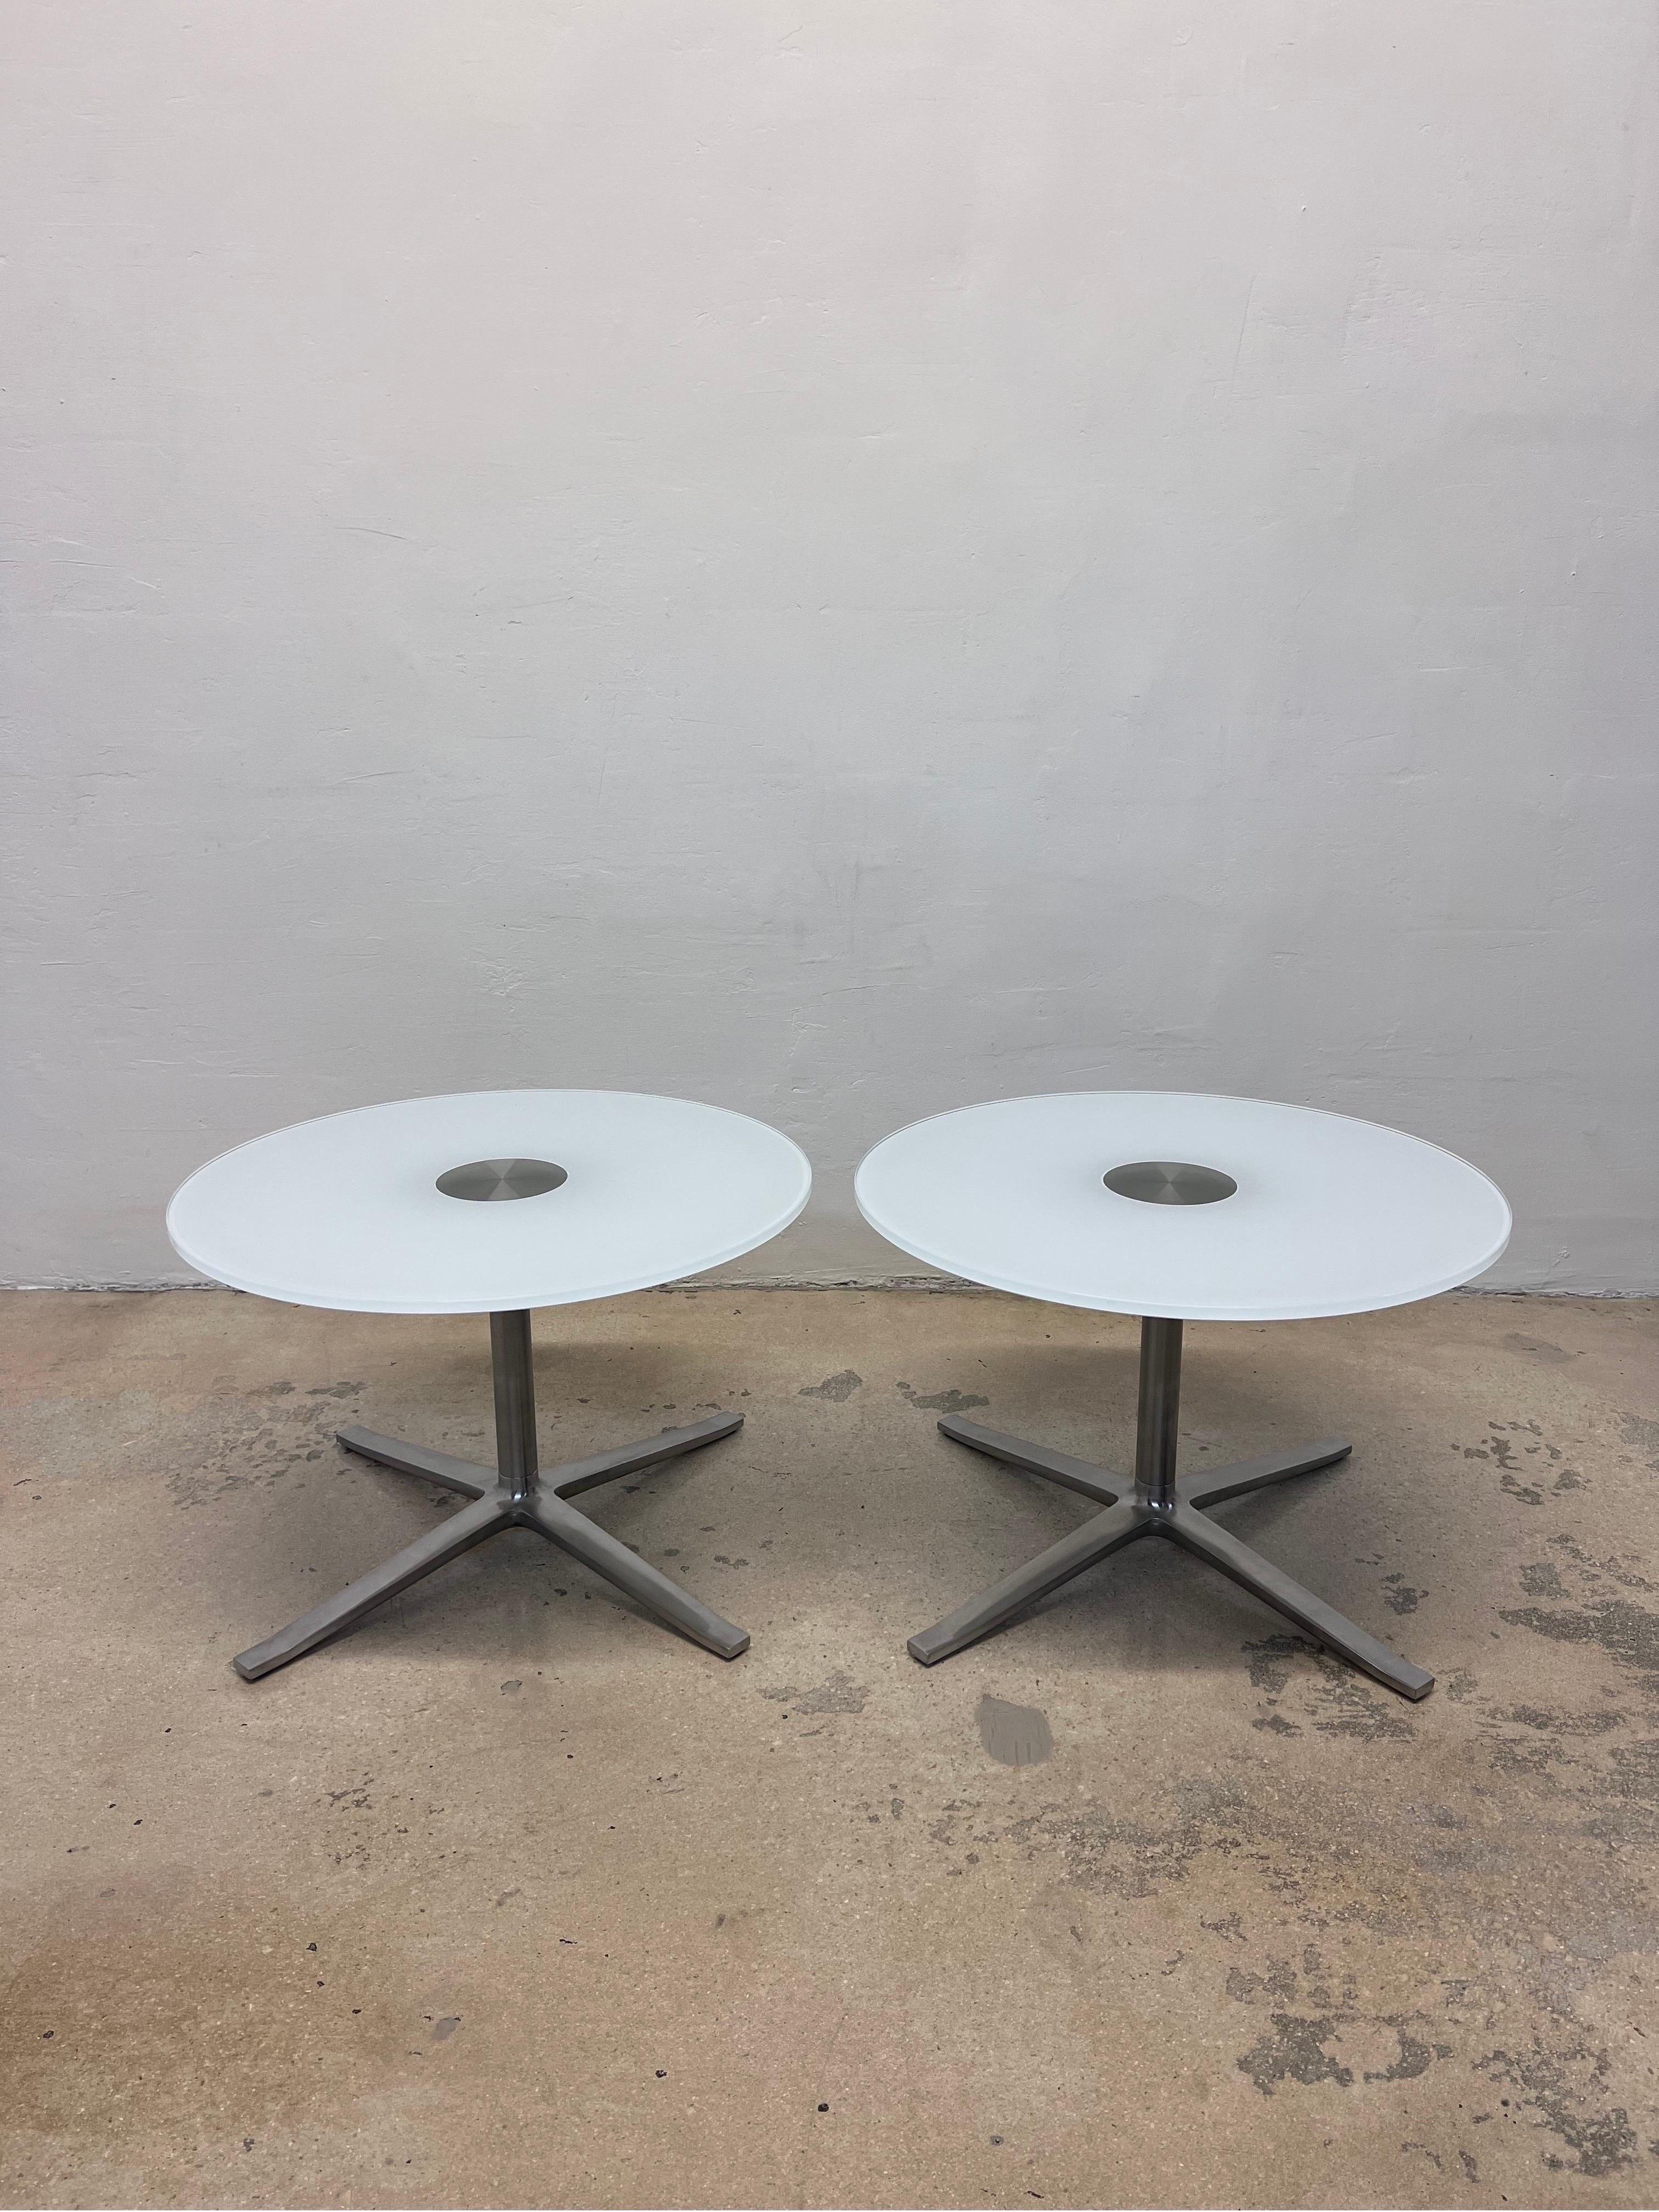 Pair of Bob's occasional tables with clear glass tops enameled white on the underside and supported by a polished aluminum frame. The Bob's collection is designed by Pearson Lloyd and manufactured by Coalesse.

Glass Dimensions:
24